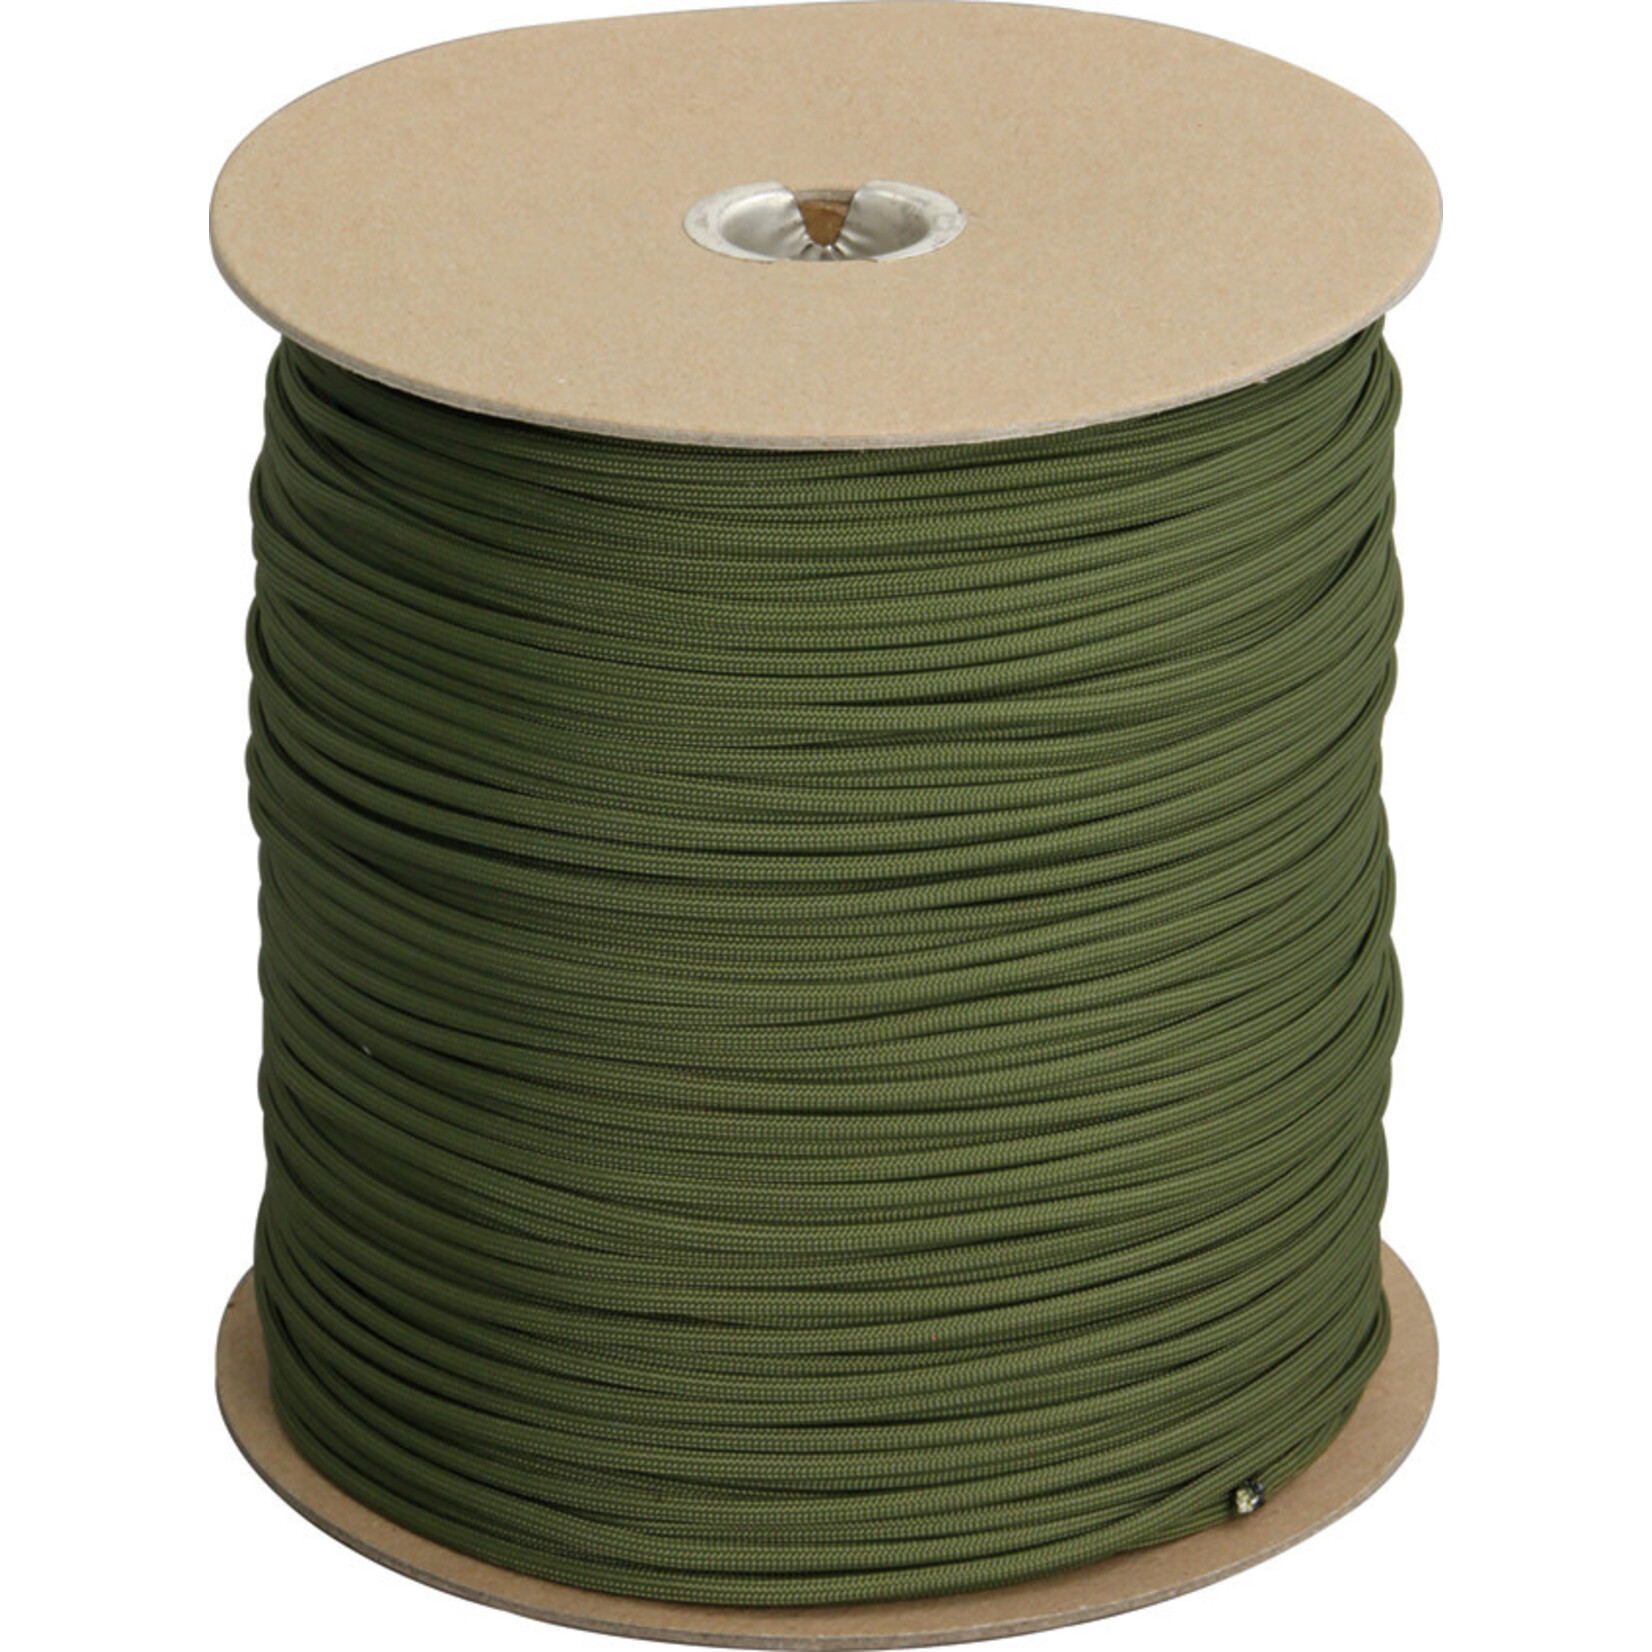 Atwood Rope Atwood 550 Paracord 1000ft Spool - 5/32" (4mm)